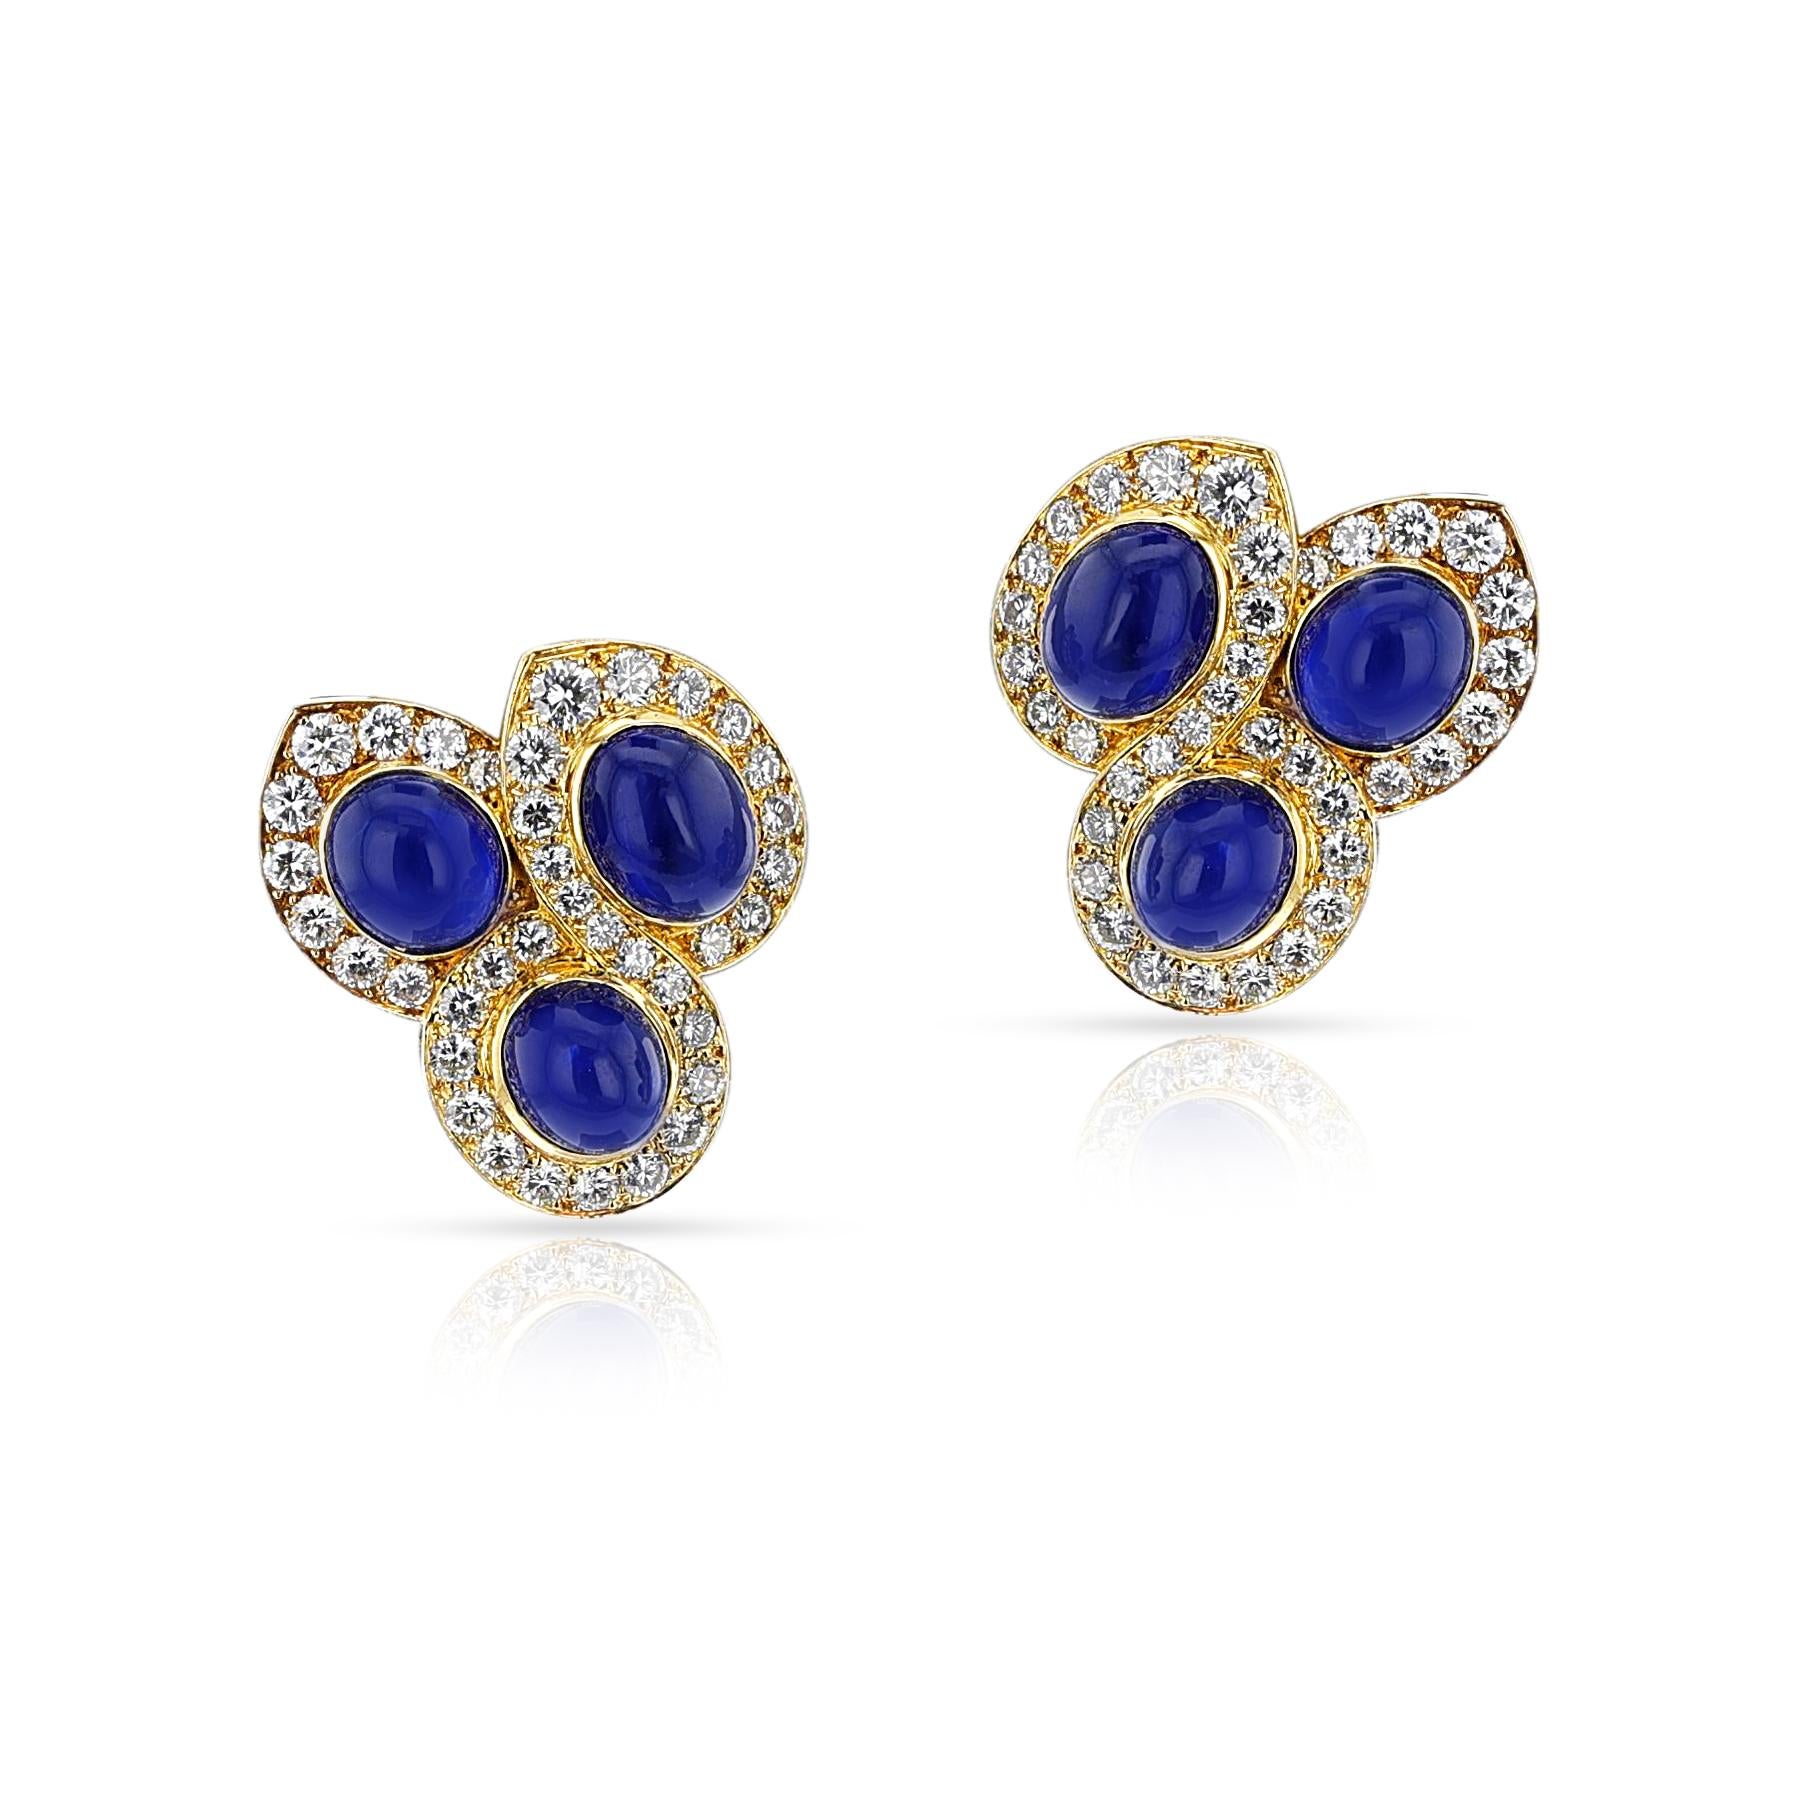 A pair of Van Cleef & Arpels Natural Sapphire Cabochon and Diamond Earrings made in 18k Yellow Gold. Signed and numbered. The total weight is 20.30 grams and the length is 1 inch and the width is 0.95 inches. 